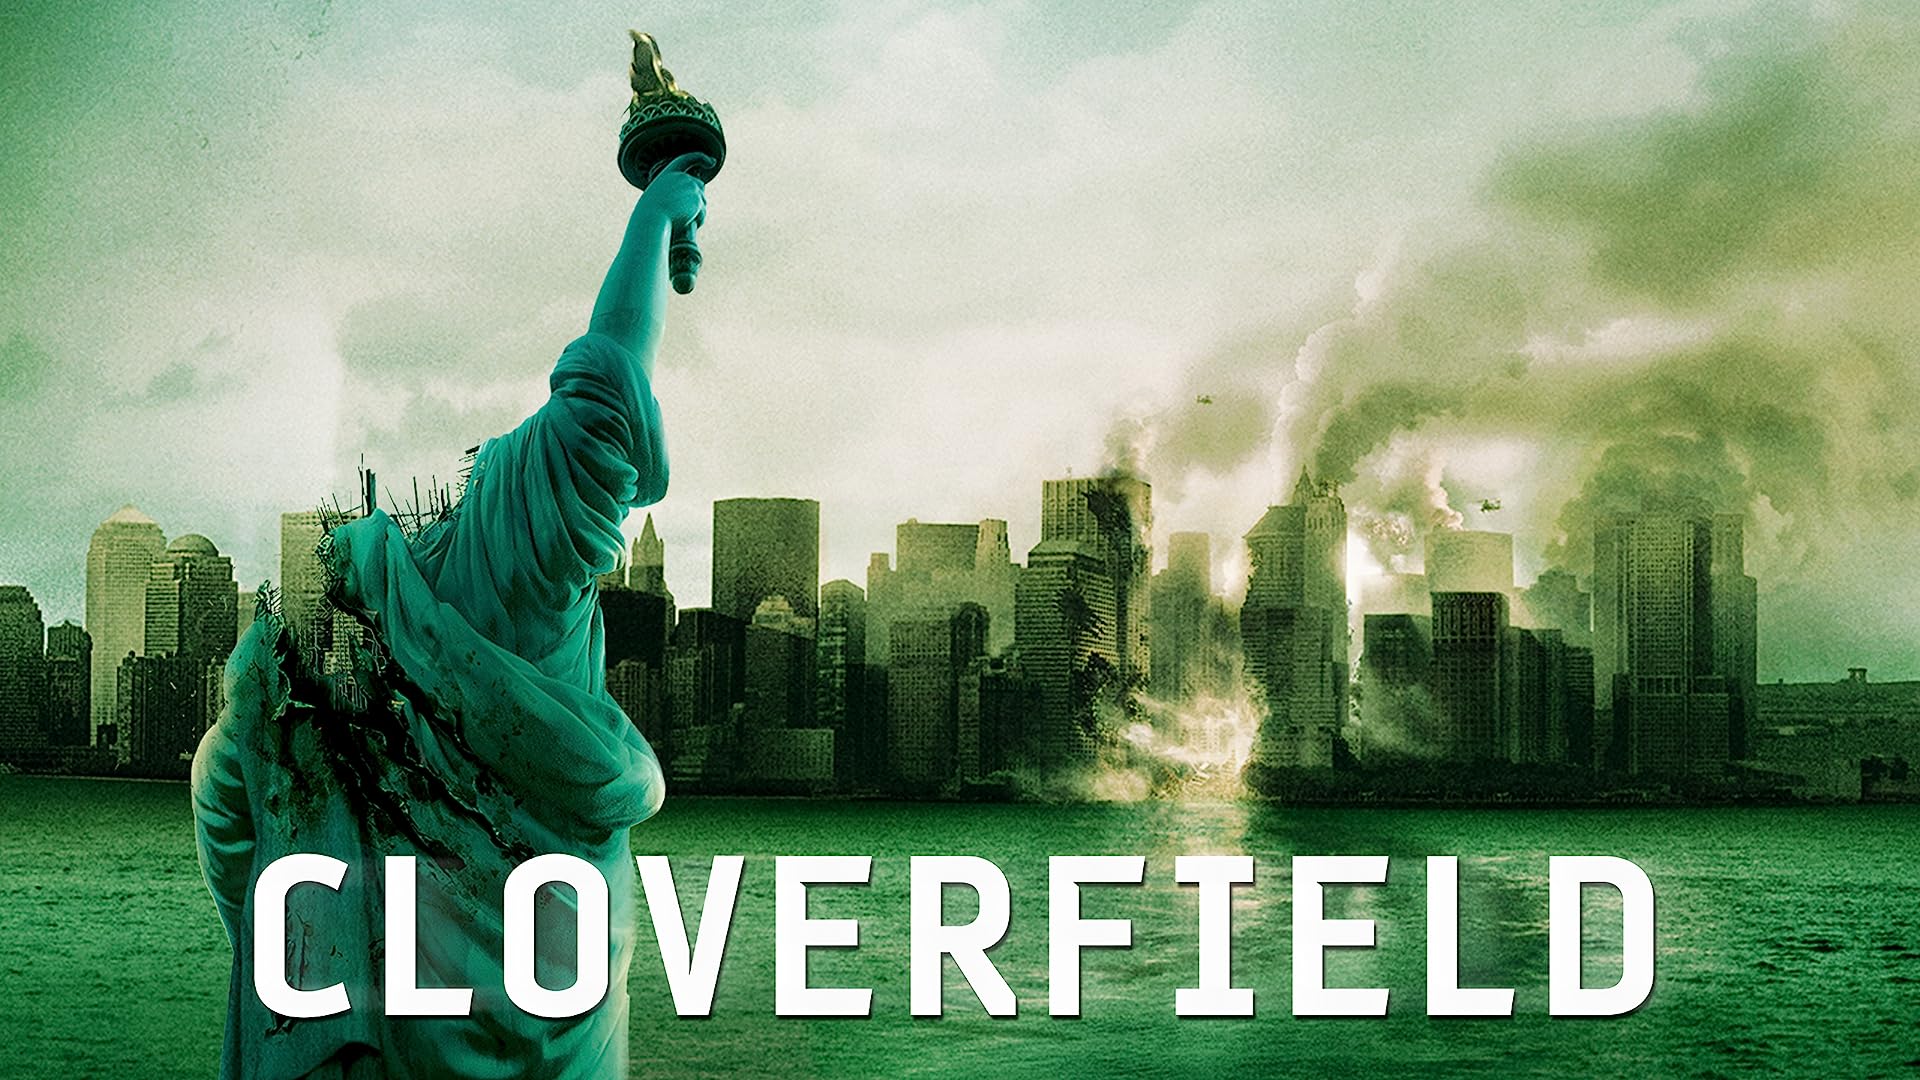 the-cloverfield-files-2019